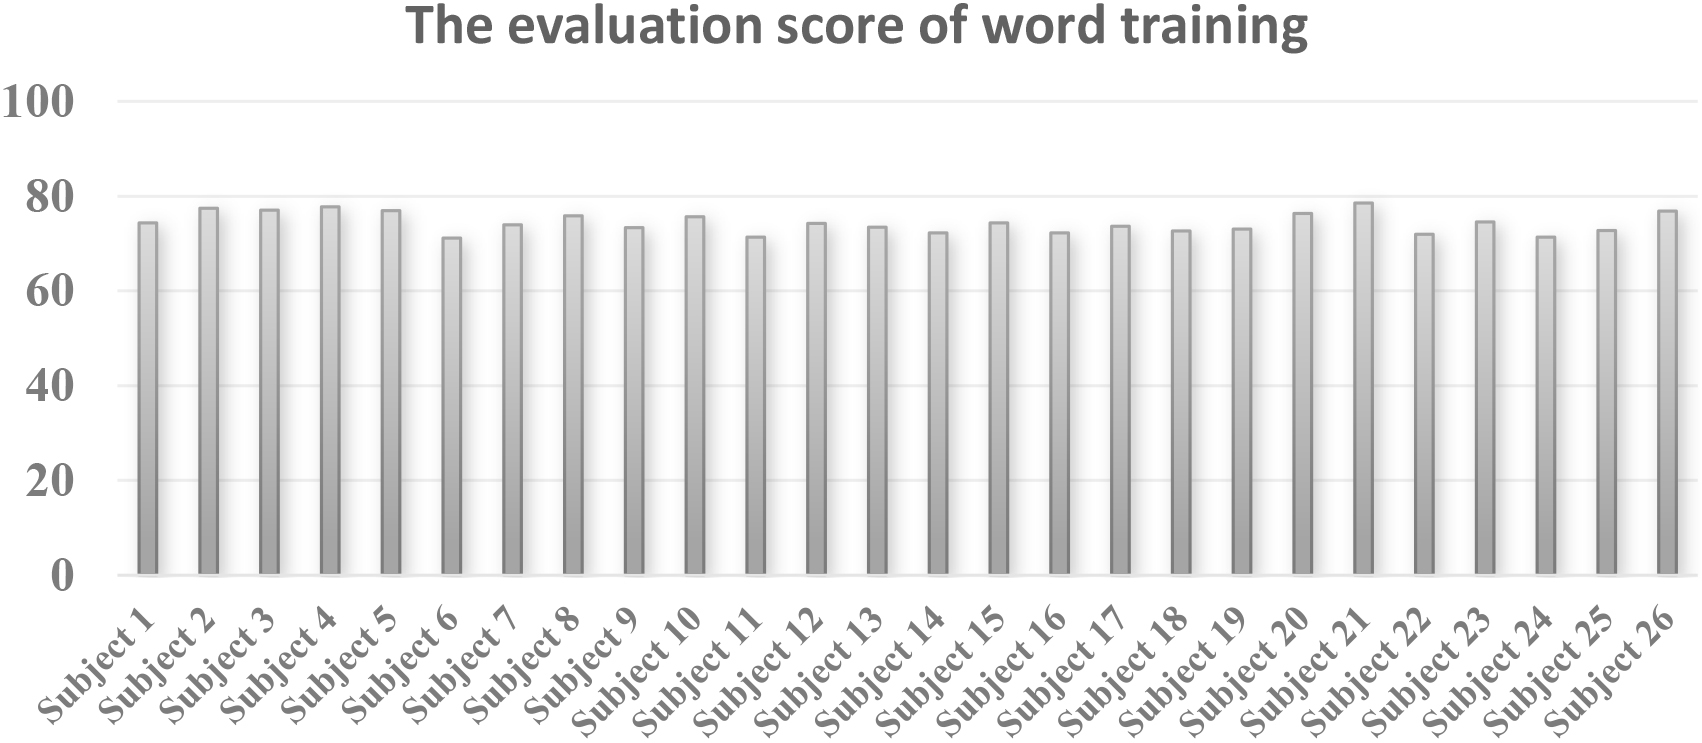 The evaluation scores of word training by ARST algorithm.